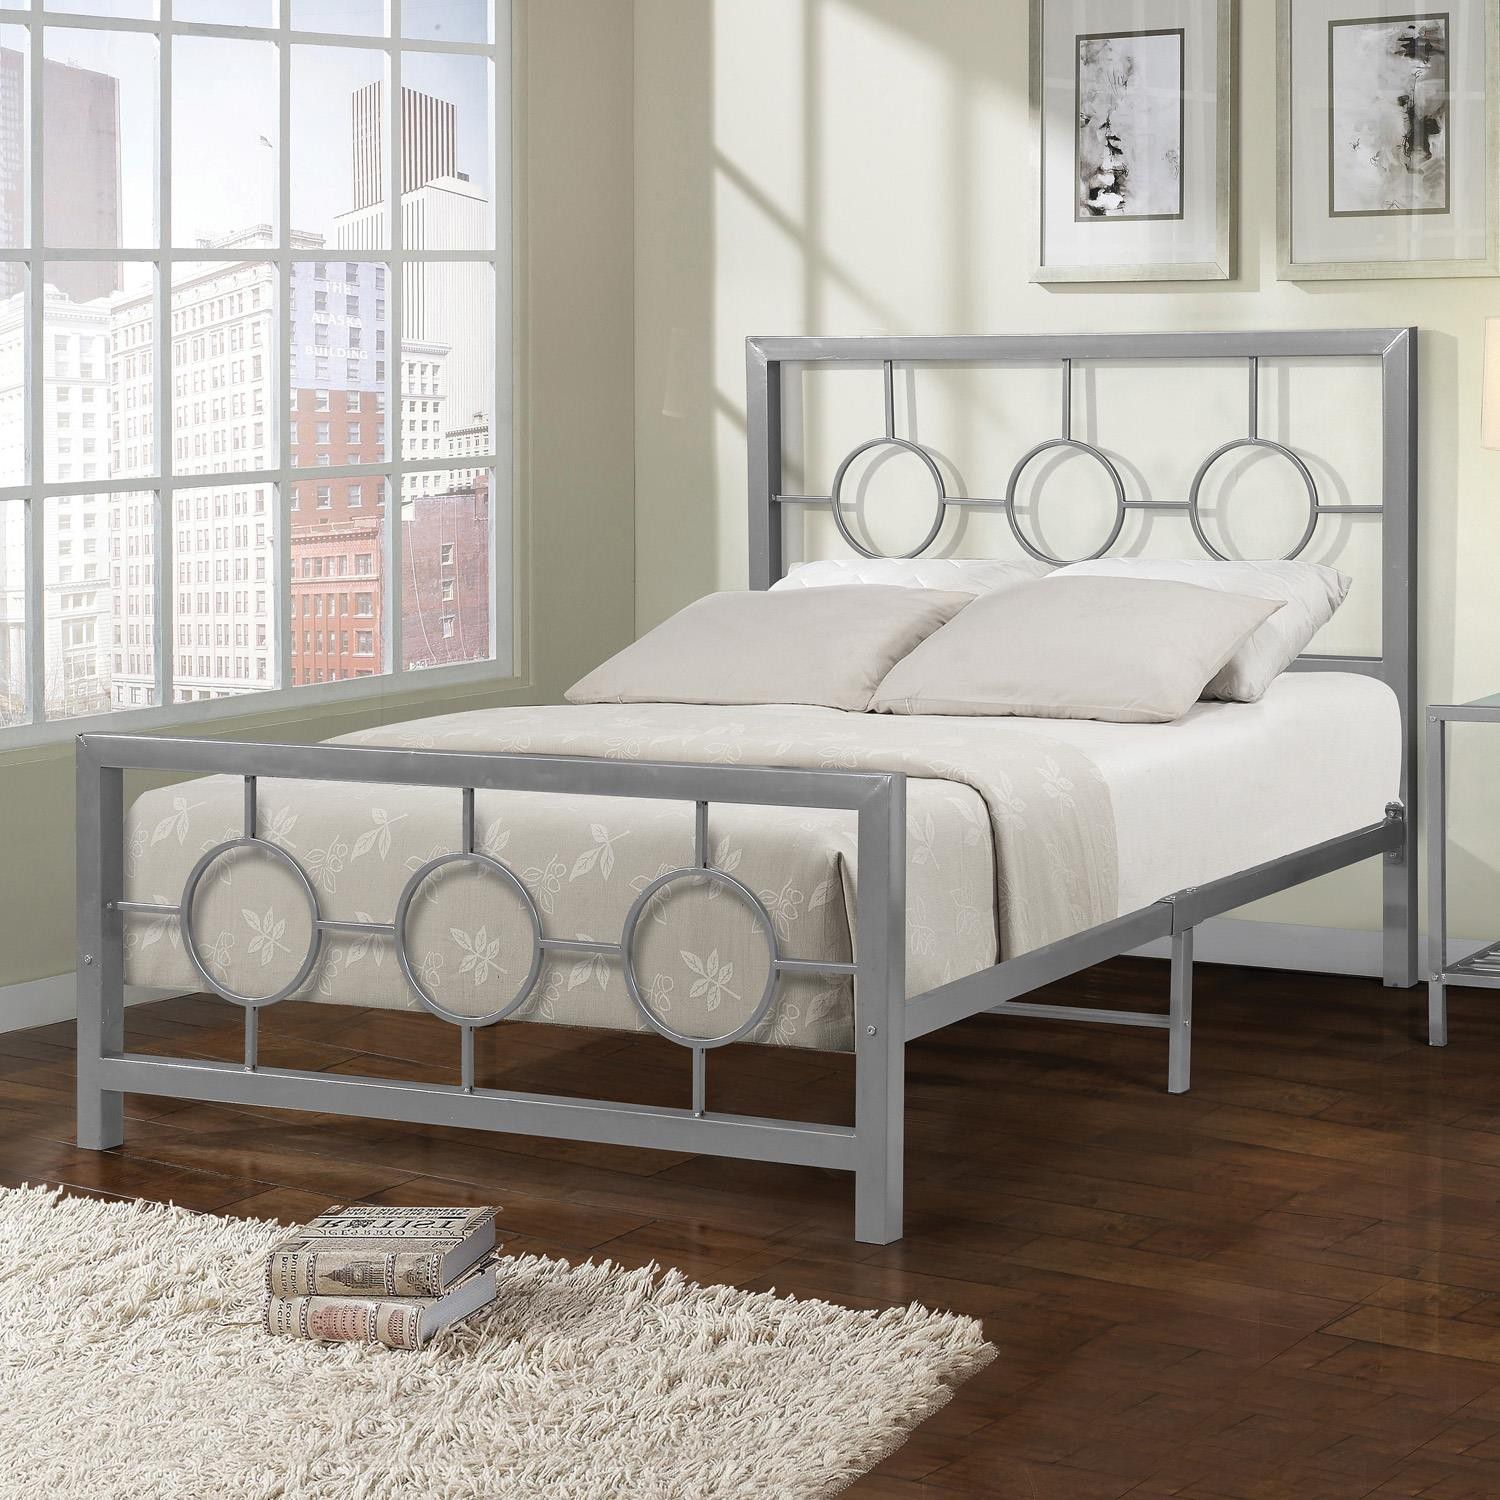 Metal Bed Frame, Circle Design 79x59x49H, Queen Size only 4 left